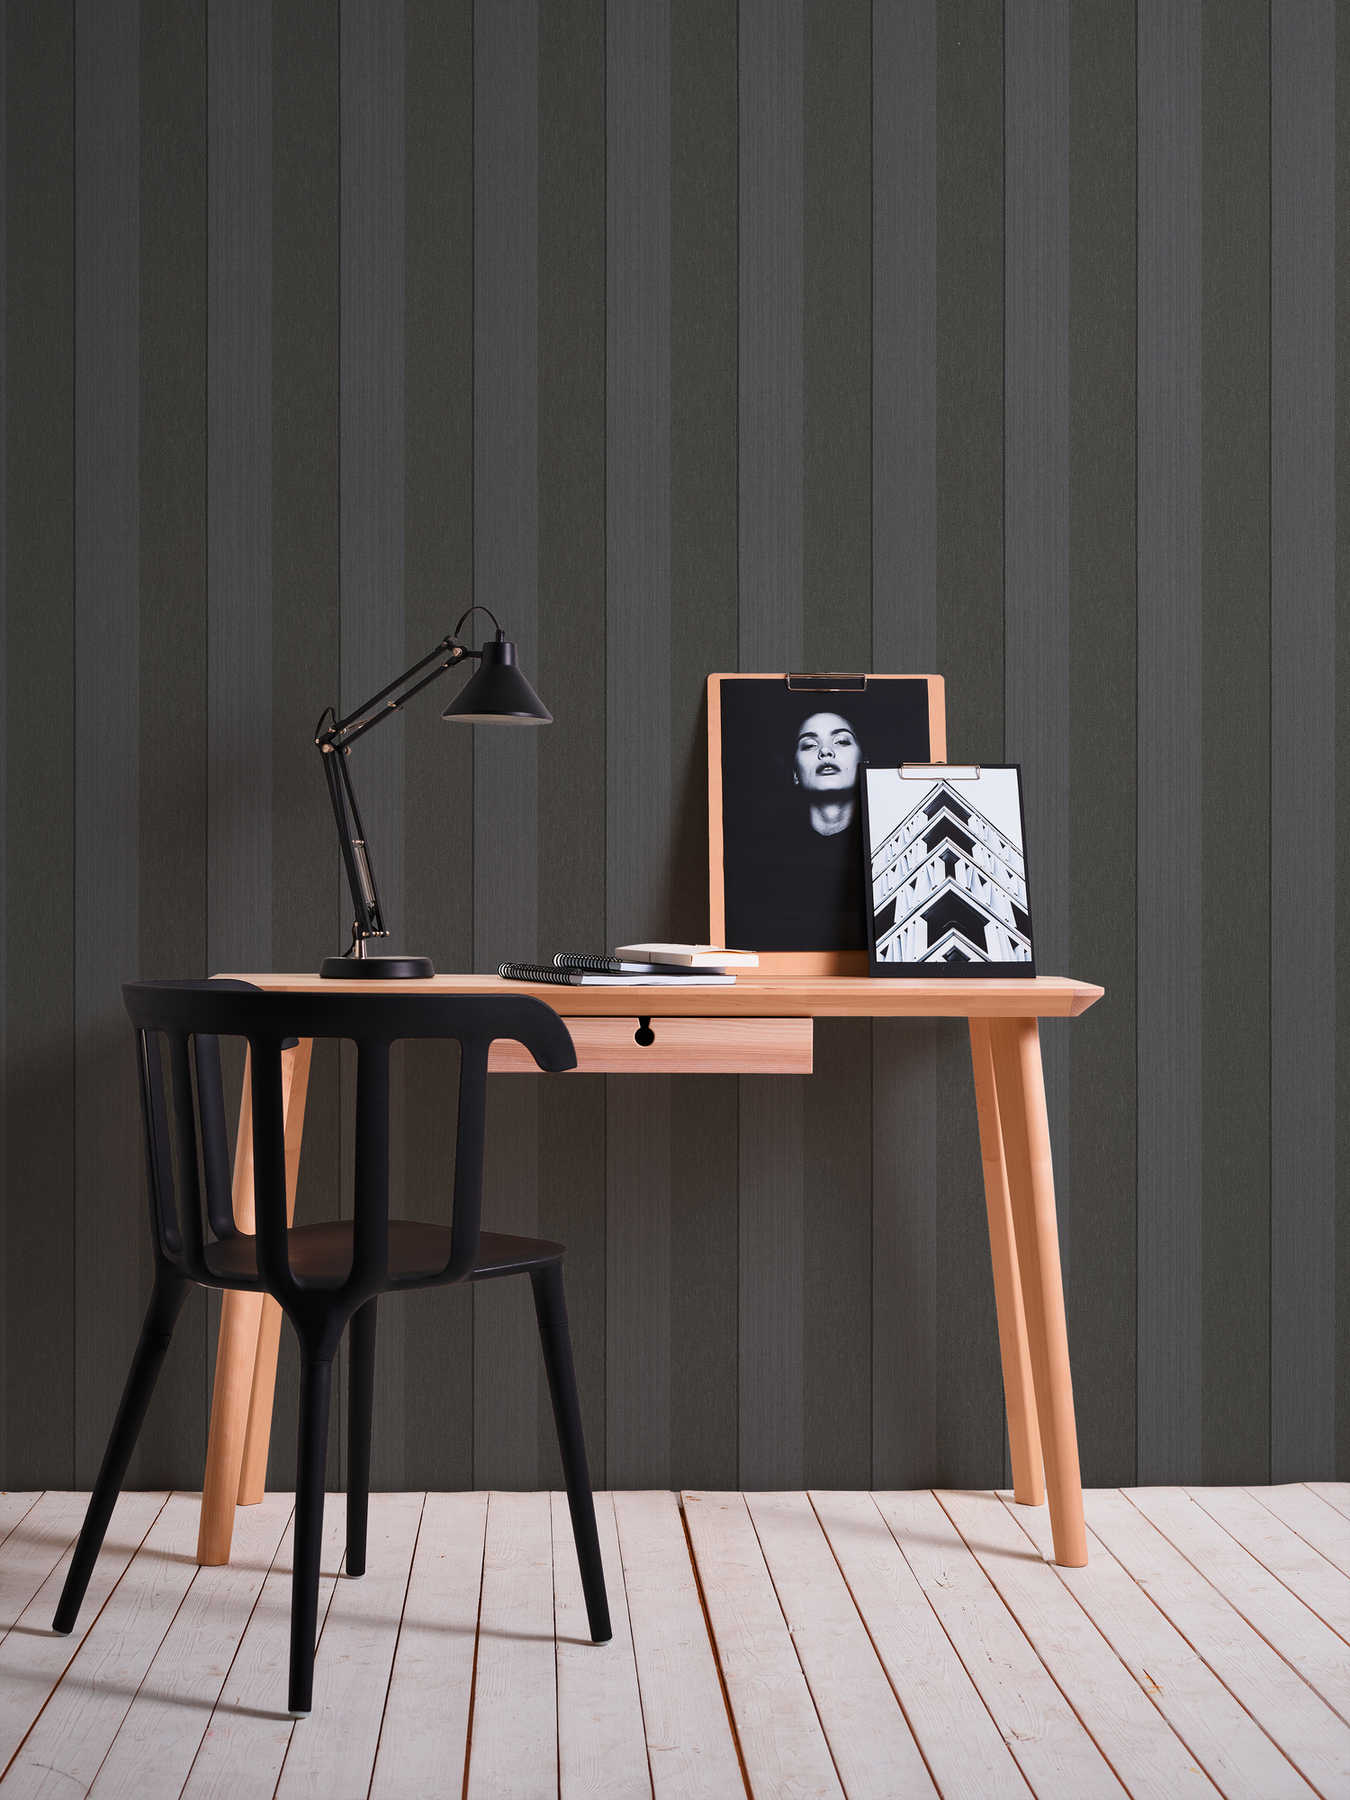             Dark non-woven wallpaper striped with textured pattern - brown
        